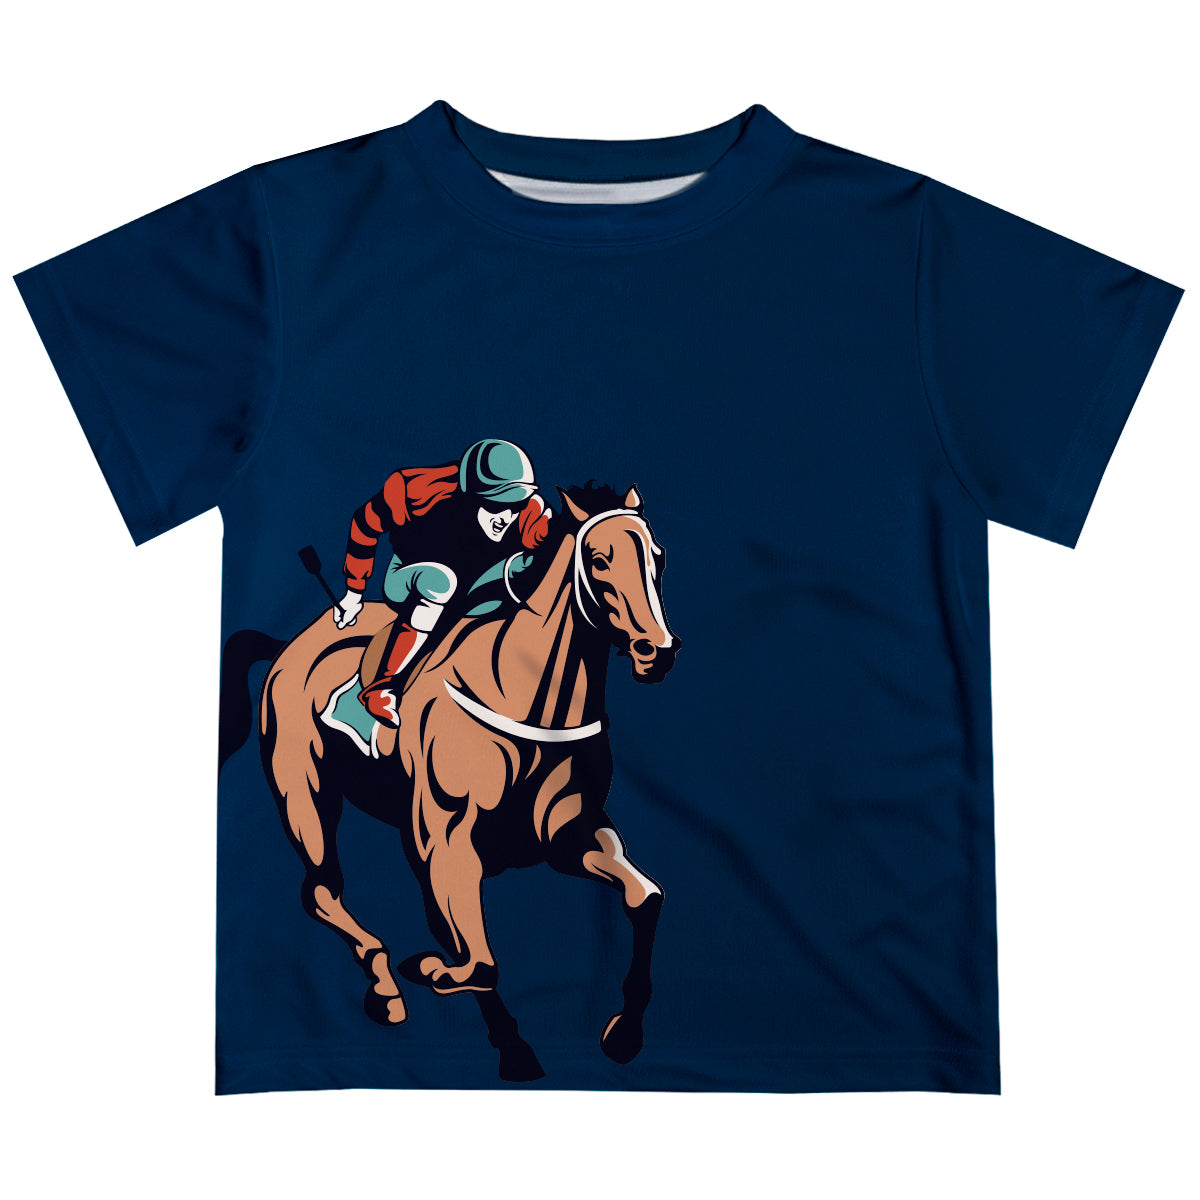 Navy short sleeve equestrian boys tee shirt with name - Wimziy&Co.